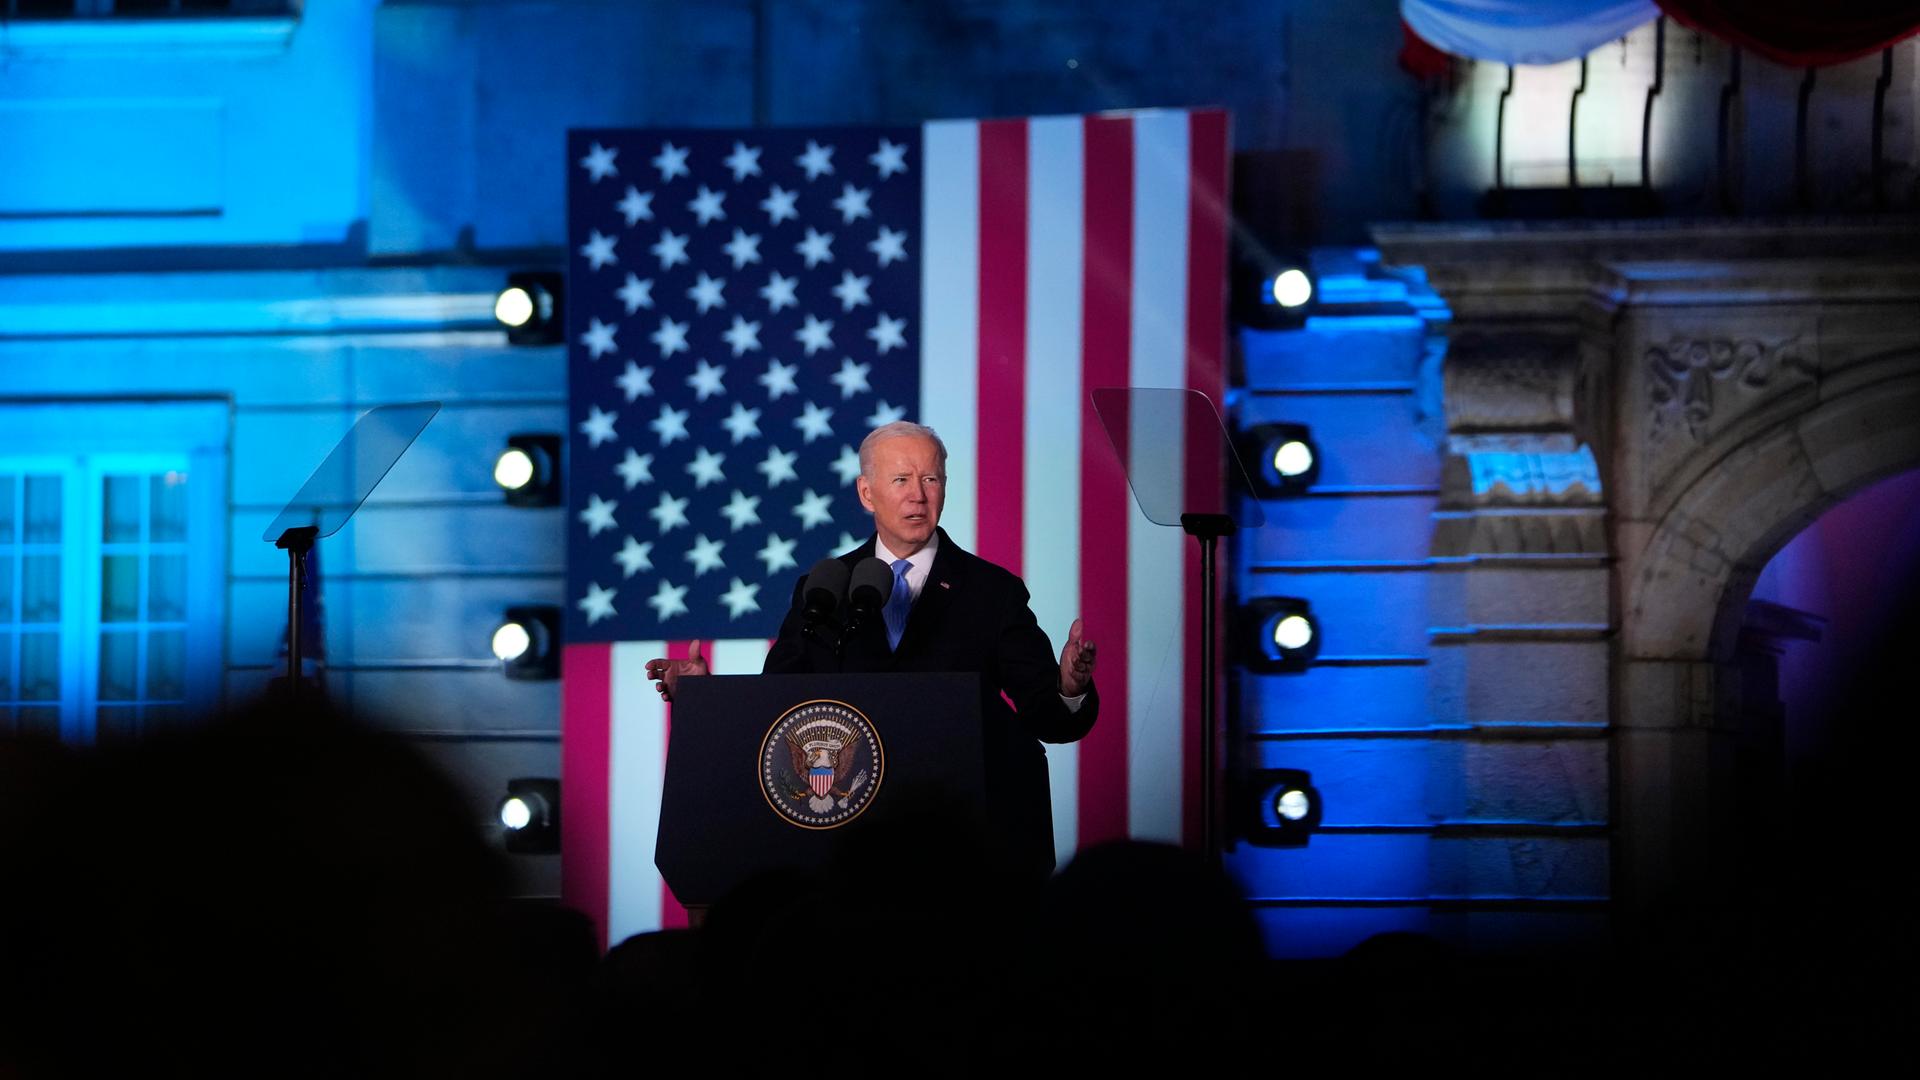 U.S. President Joe Biden delivers a speech at the Royal Castle in Warsaw, Poland, Saturday, March 26, 2022. Biden is in Poland for the final leg of his four-day trip to Europe as he tries to maintain unity among allies and support Ukraine's defence. (AP Photo/Petr David Josek)